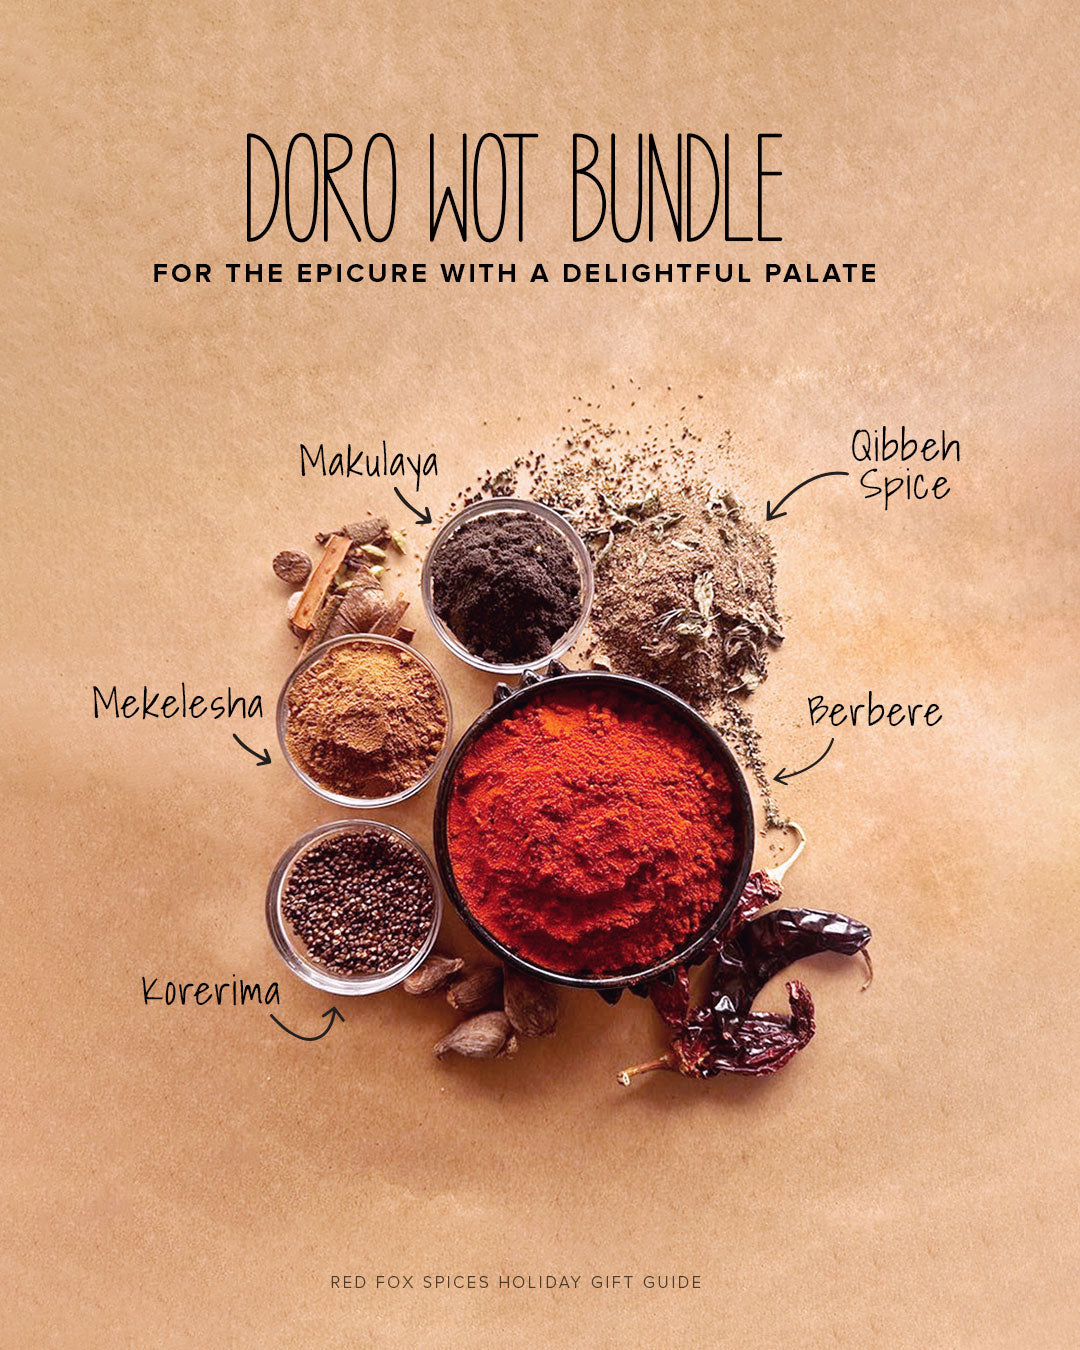 Doro Wot Bundle: For the Epicure with a Delighful Palate